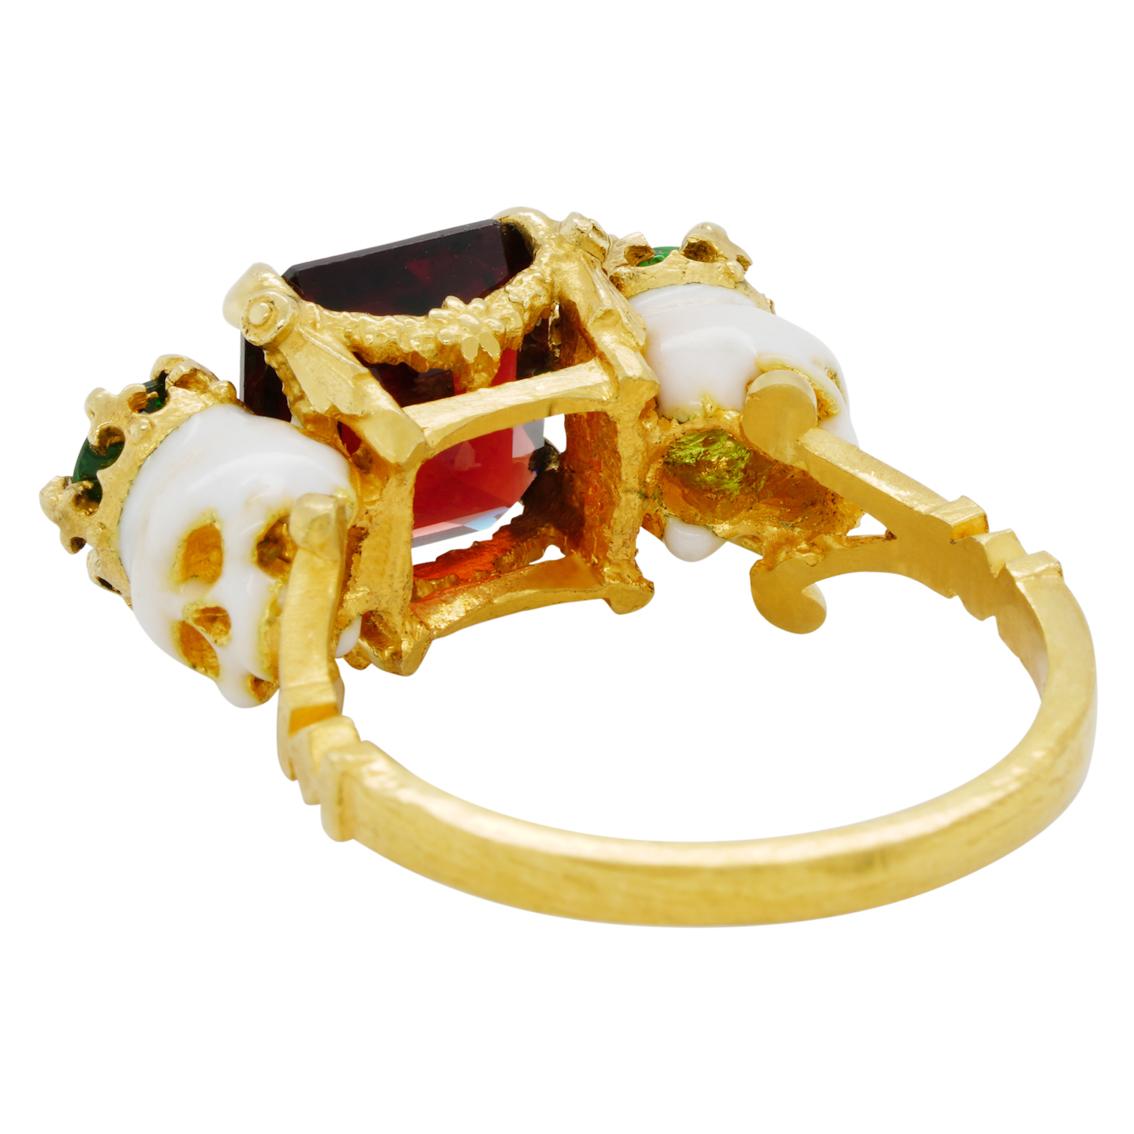 Women's or Men's Catacomb Saints Garland Ring in 22 Karat Gold with Red and Tsavorite Garnets